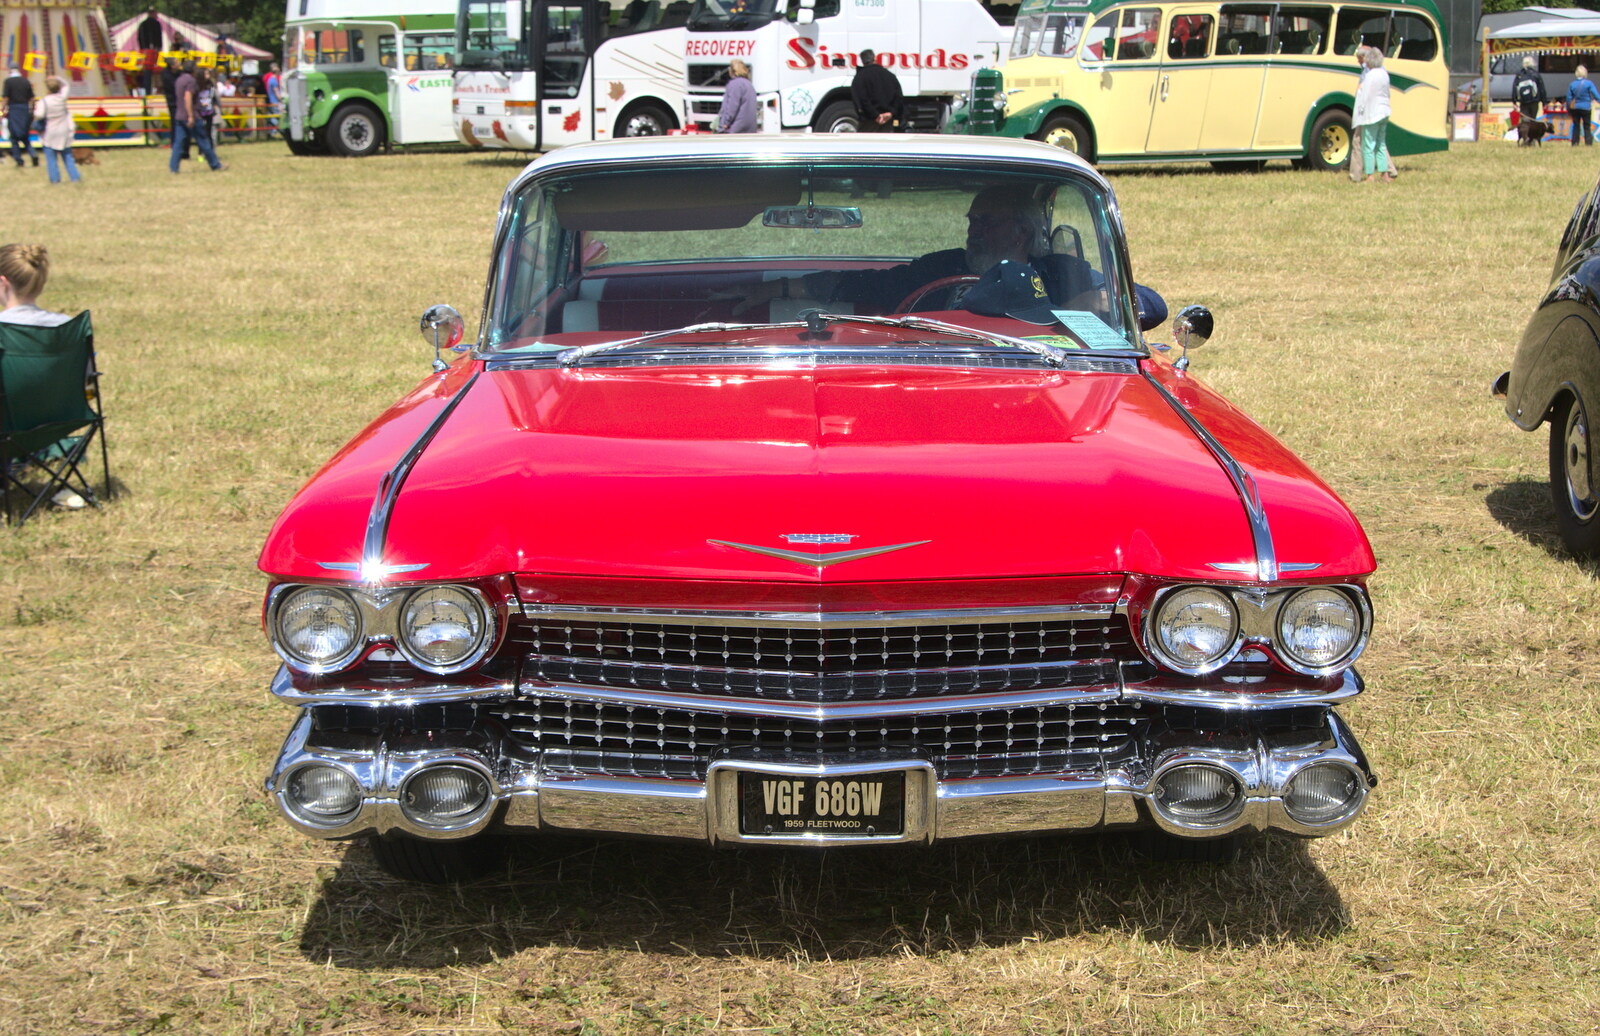 This car looks lie Christine, the Plymouth Fury from A Vintage Tractorey Sort of Day, Palgrave, Suffolk - 21st June 2015